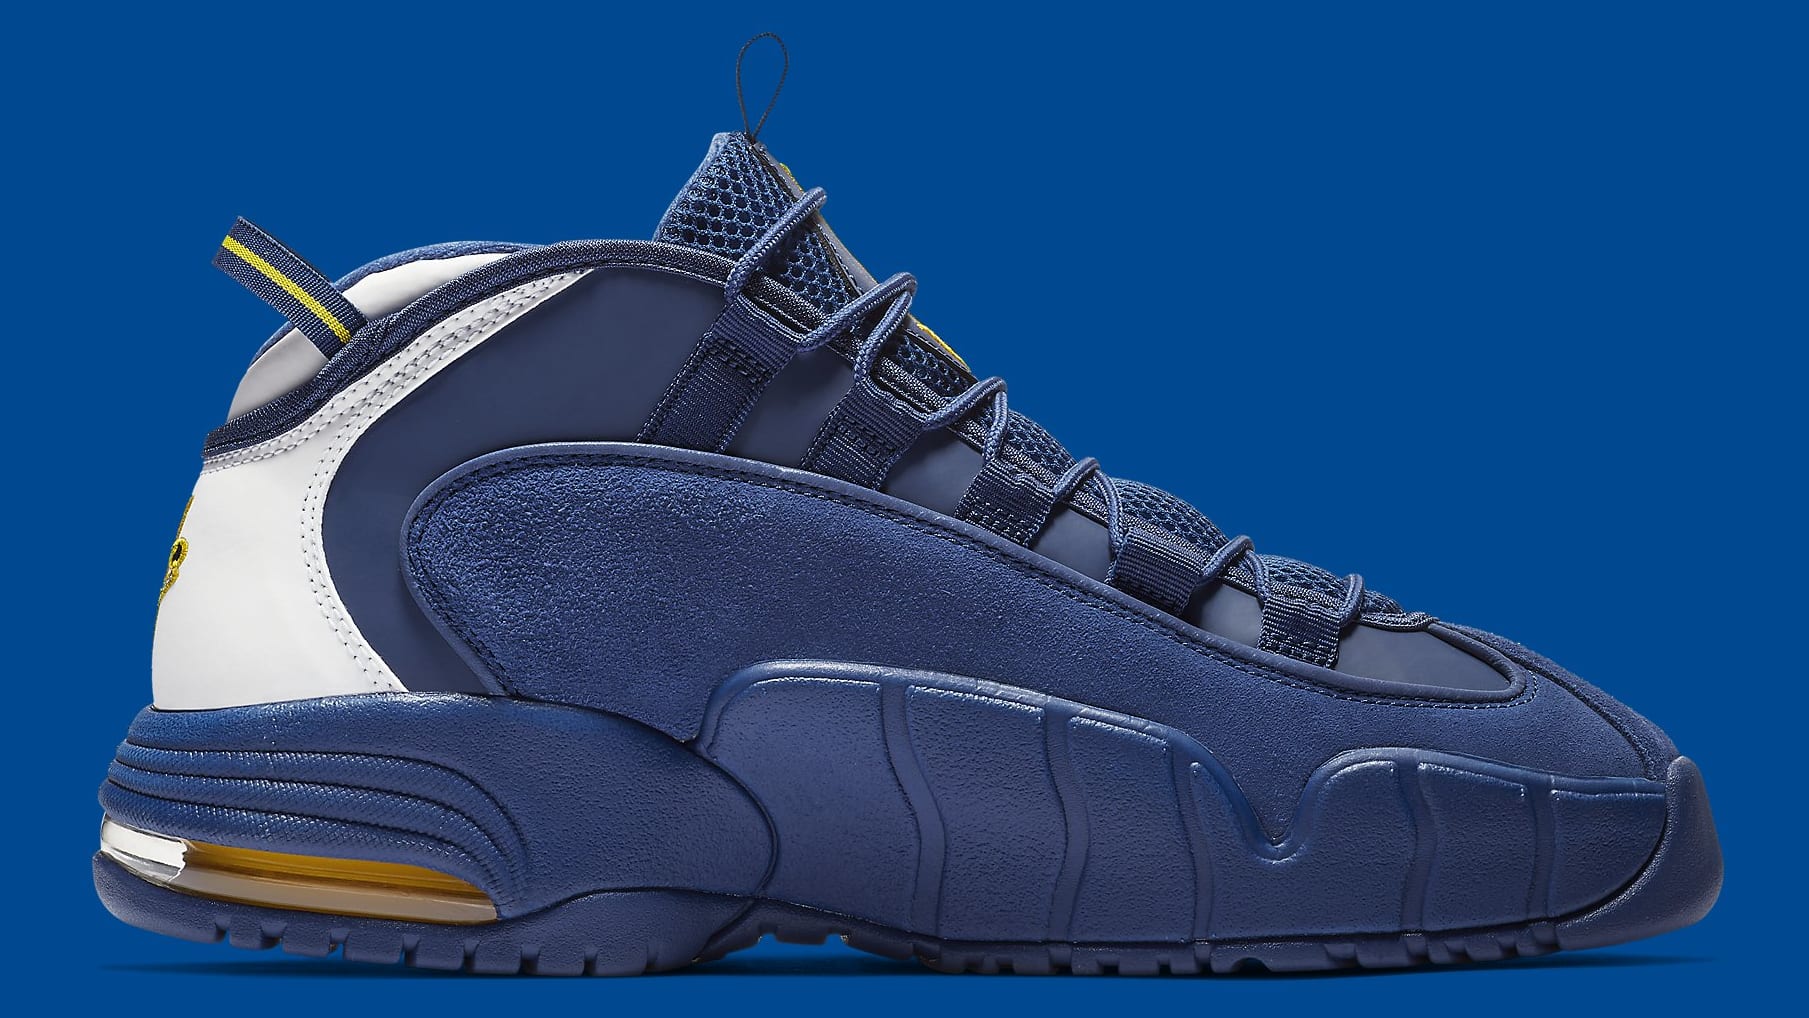 Nike Air Max Penny 1 Warriors Release Date 685153-401 Medial